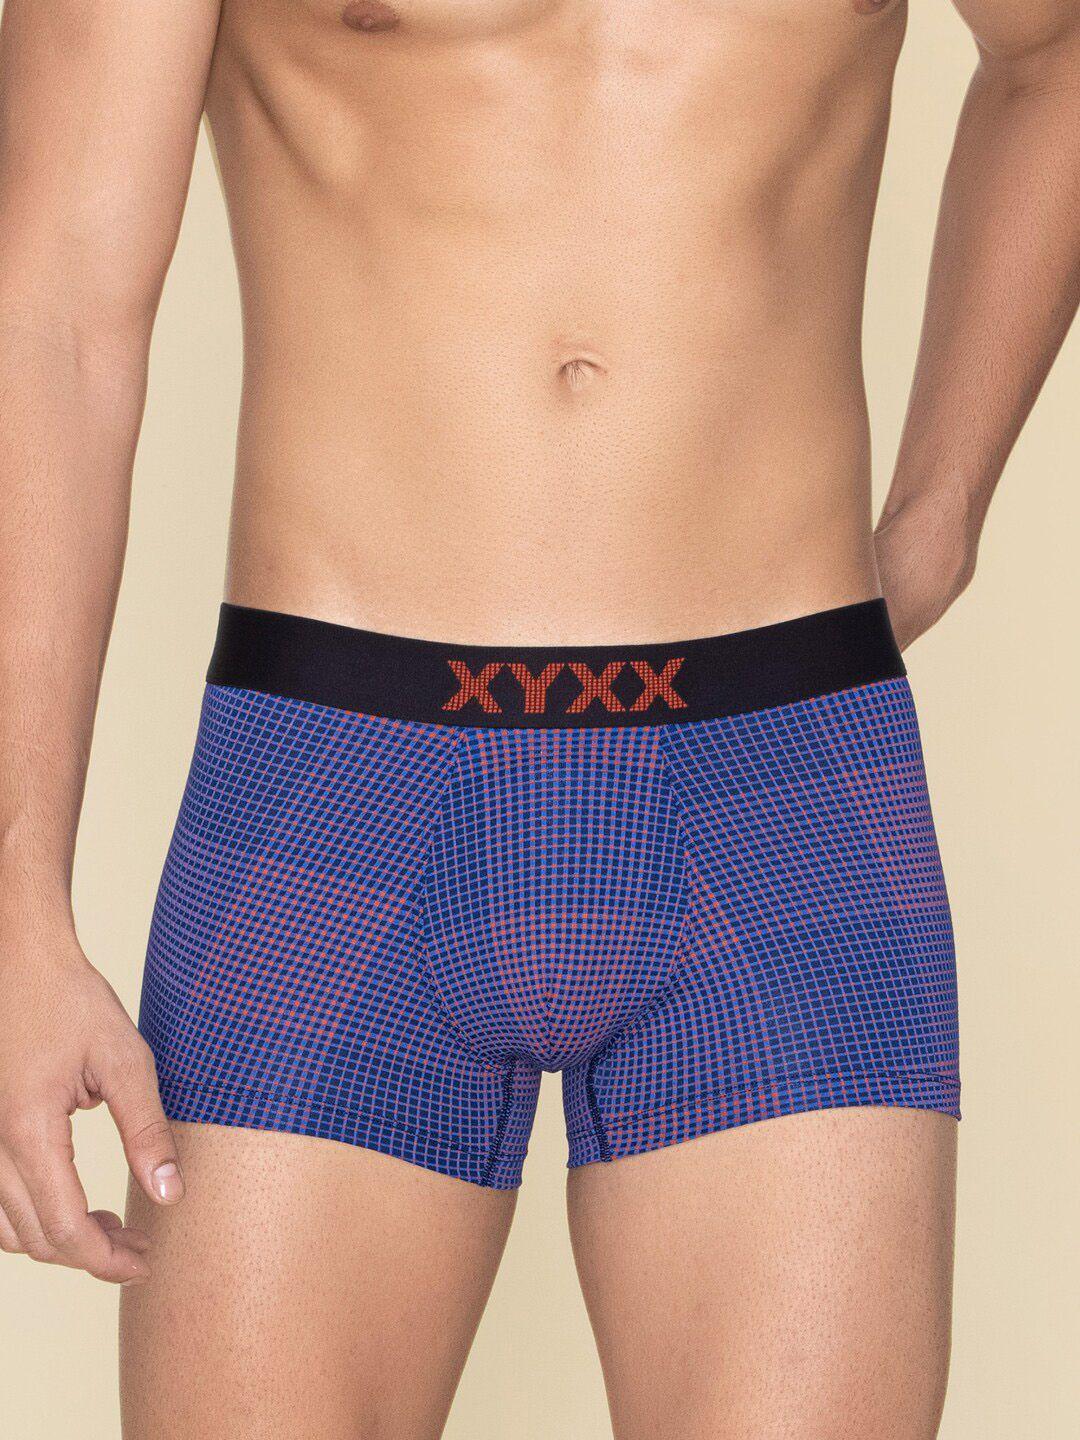 xyxx checked trunk
xytrnk188